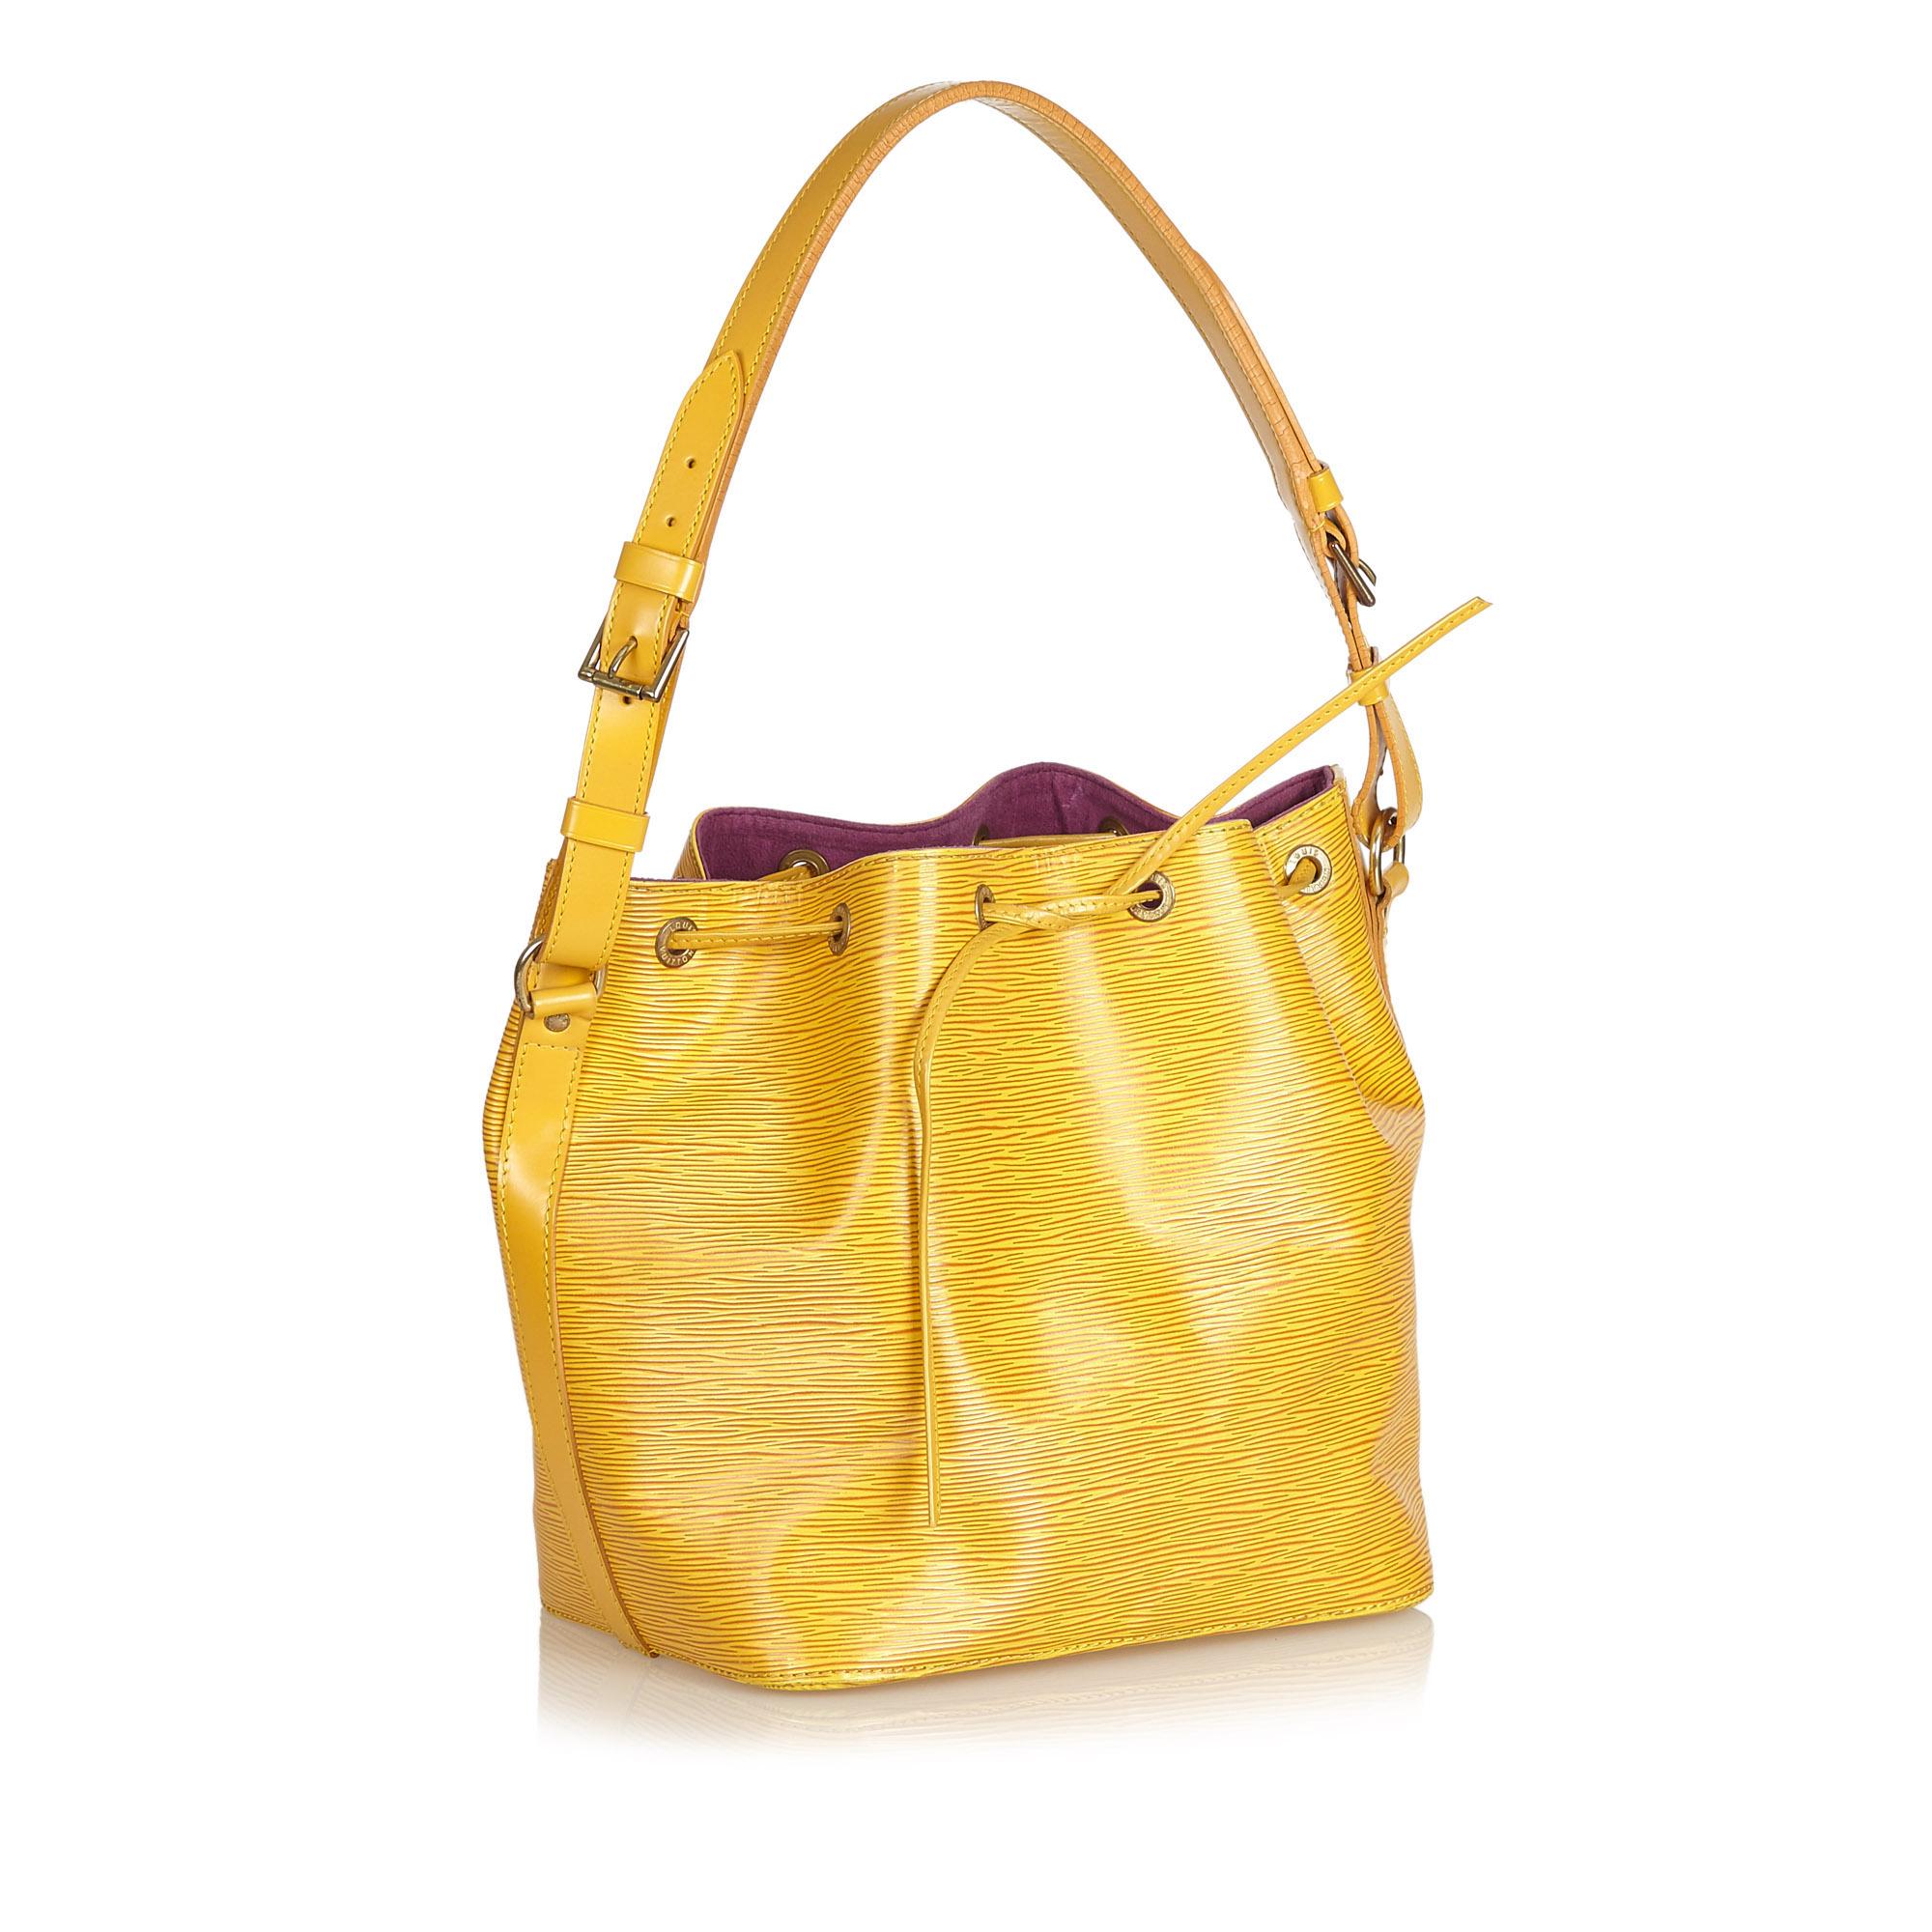 The Petit Noe features an Epi leather body, an adjustable flat strap, and an open top with a drawstring closure. It carries as B condition rating.

Inclusions: 
This item does not come with inclusions.


Louis Vuitton pieces do not come with an